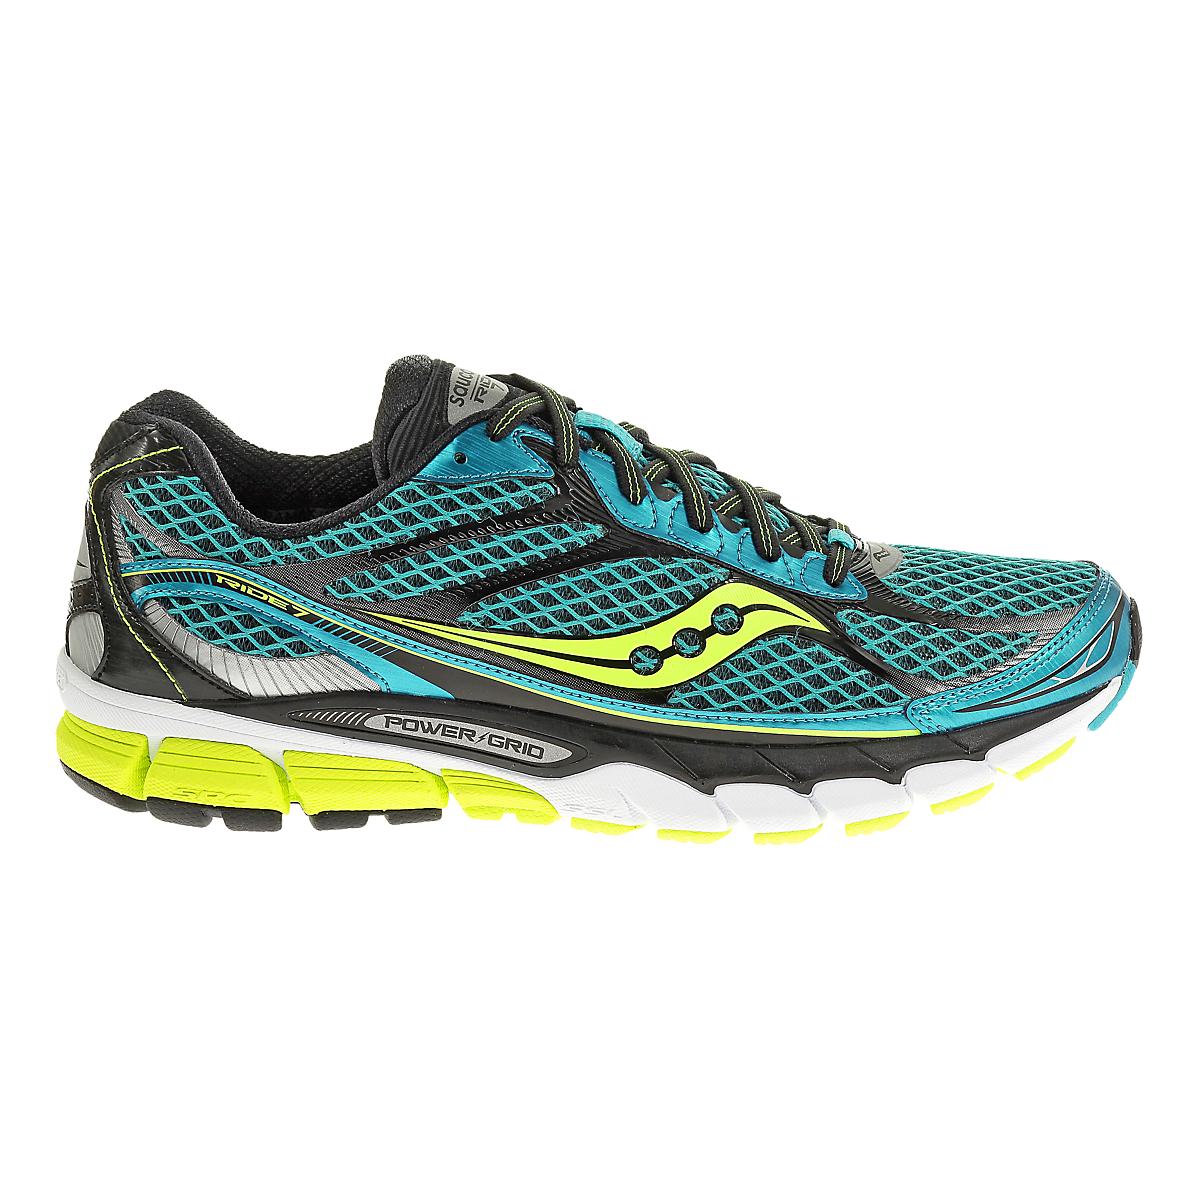 Mens Saucony Ride 7 Running Shoe at Road Runner Sports